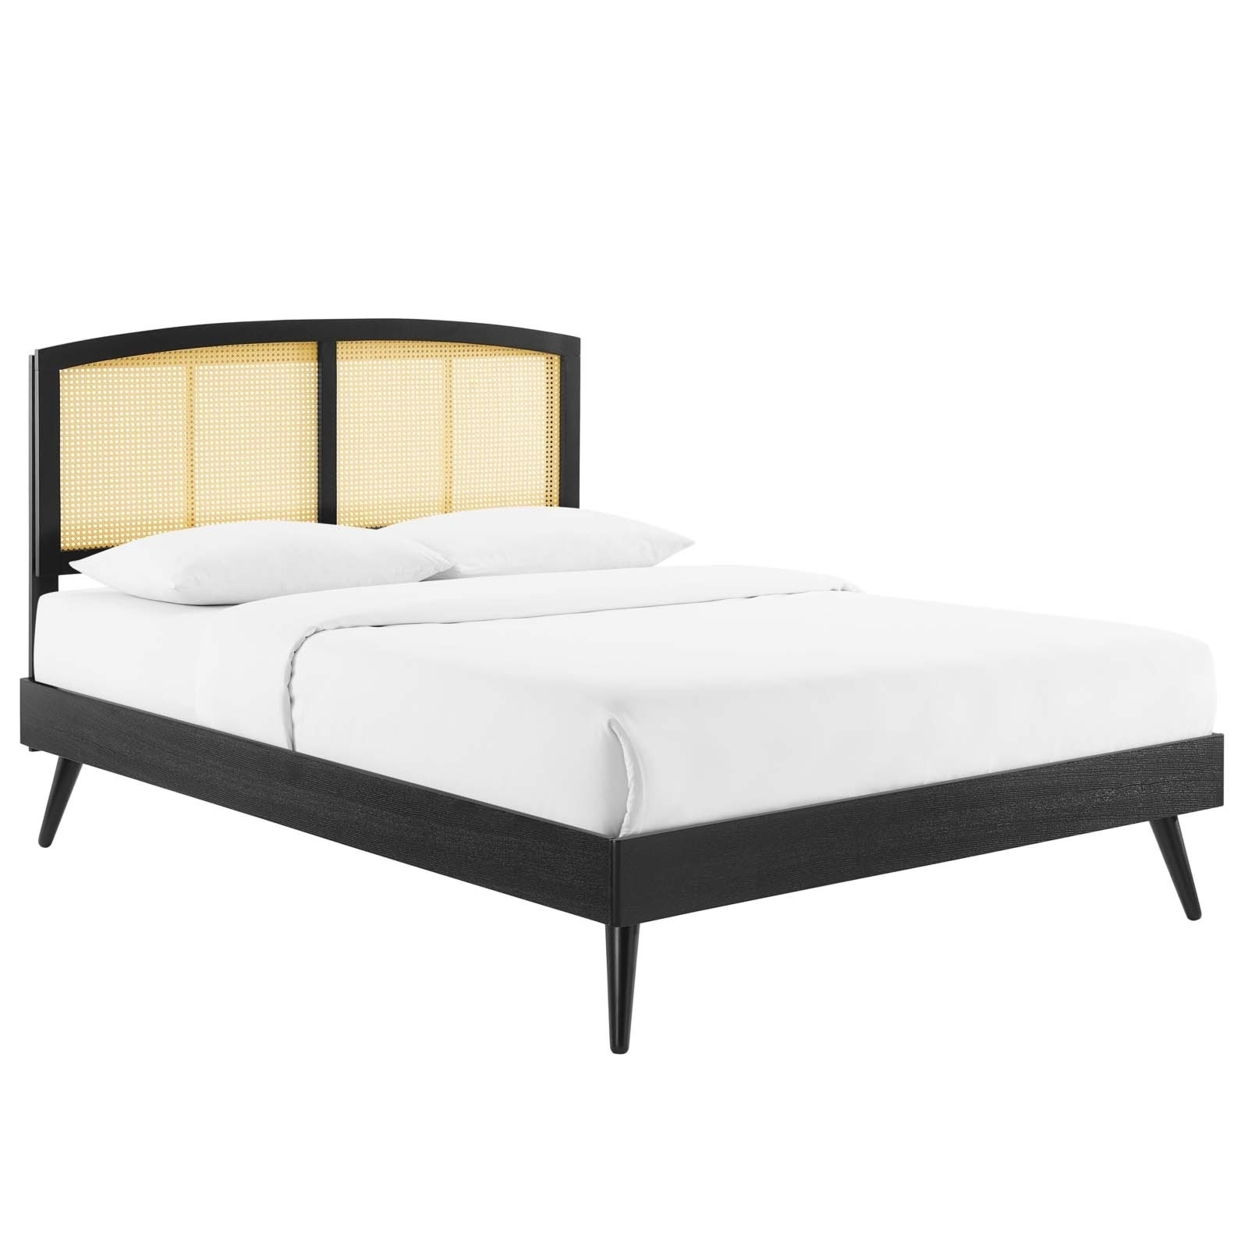 Sierra Cane And Wood Full Platform Bed With Splayed Legs, Black